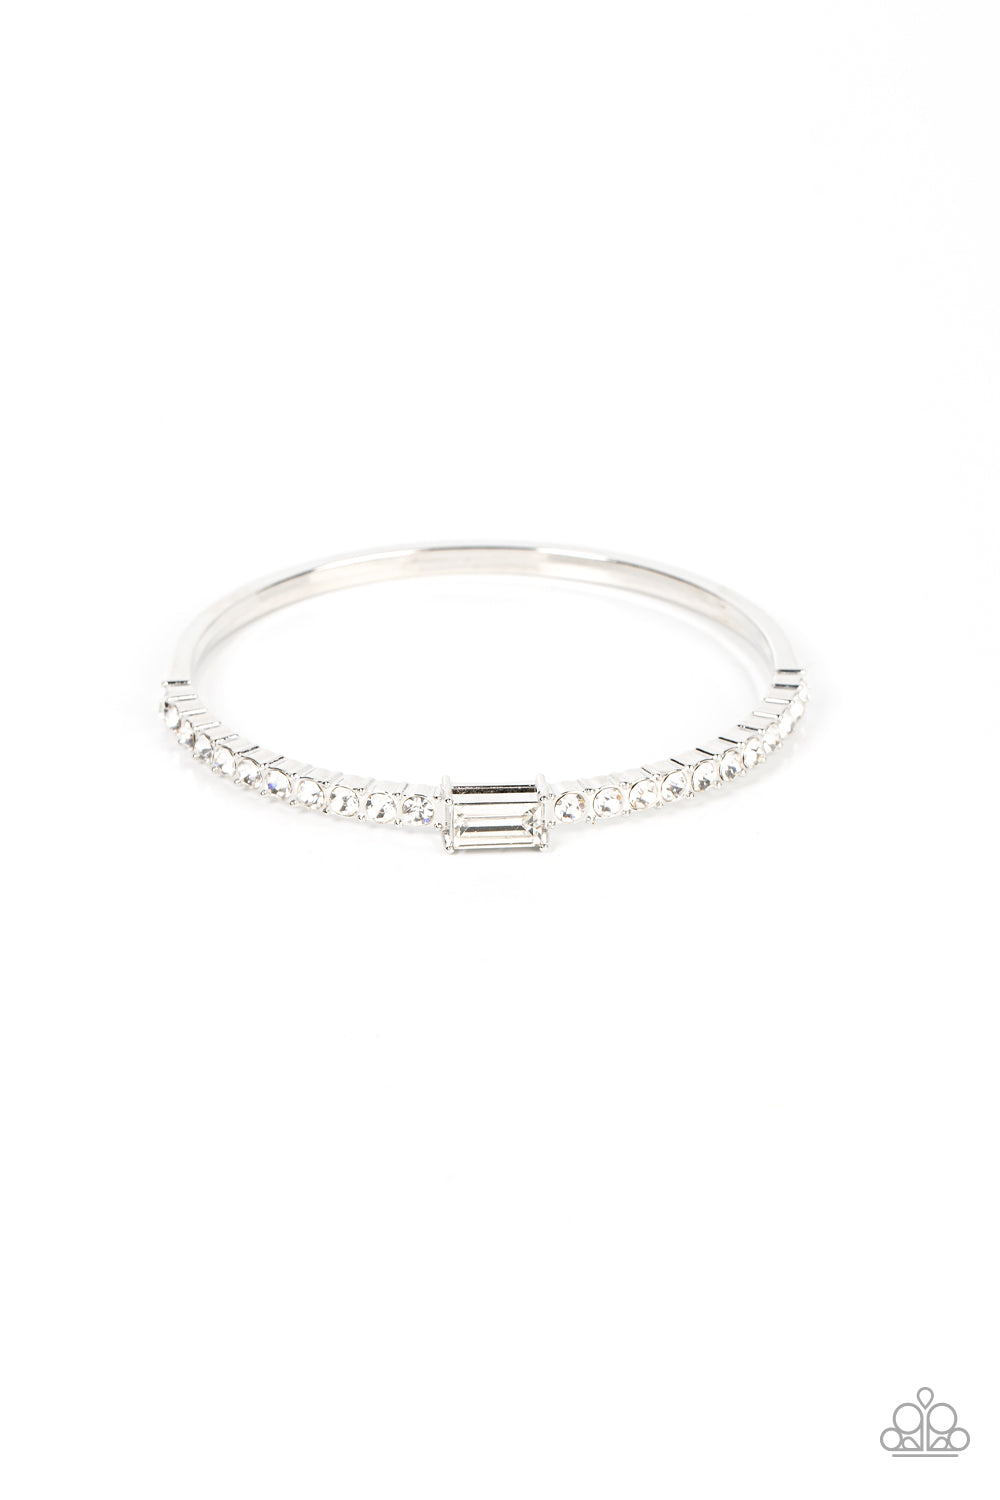 An emerald cut white rhinestone sparkles between a row of glassy white rhinestones across the front of a stunning silver bangle, resulting in a stackable and sparkly centerpiece.  Sold as one indivi